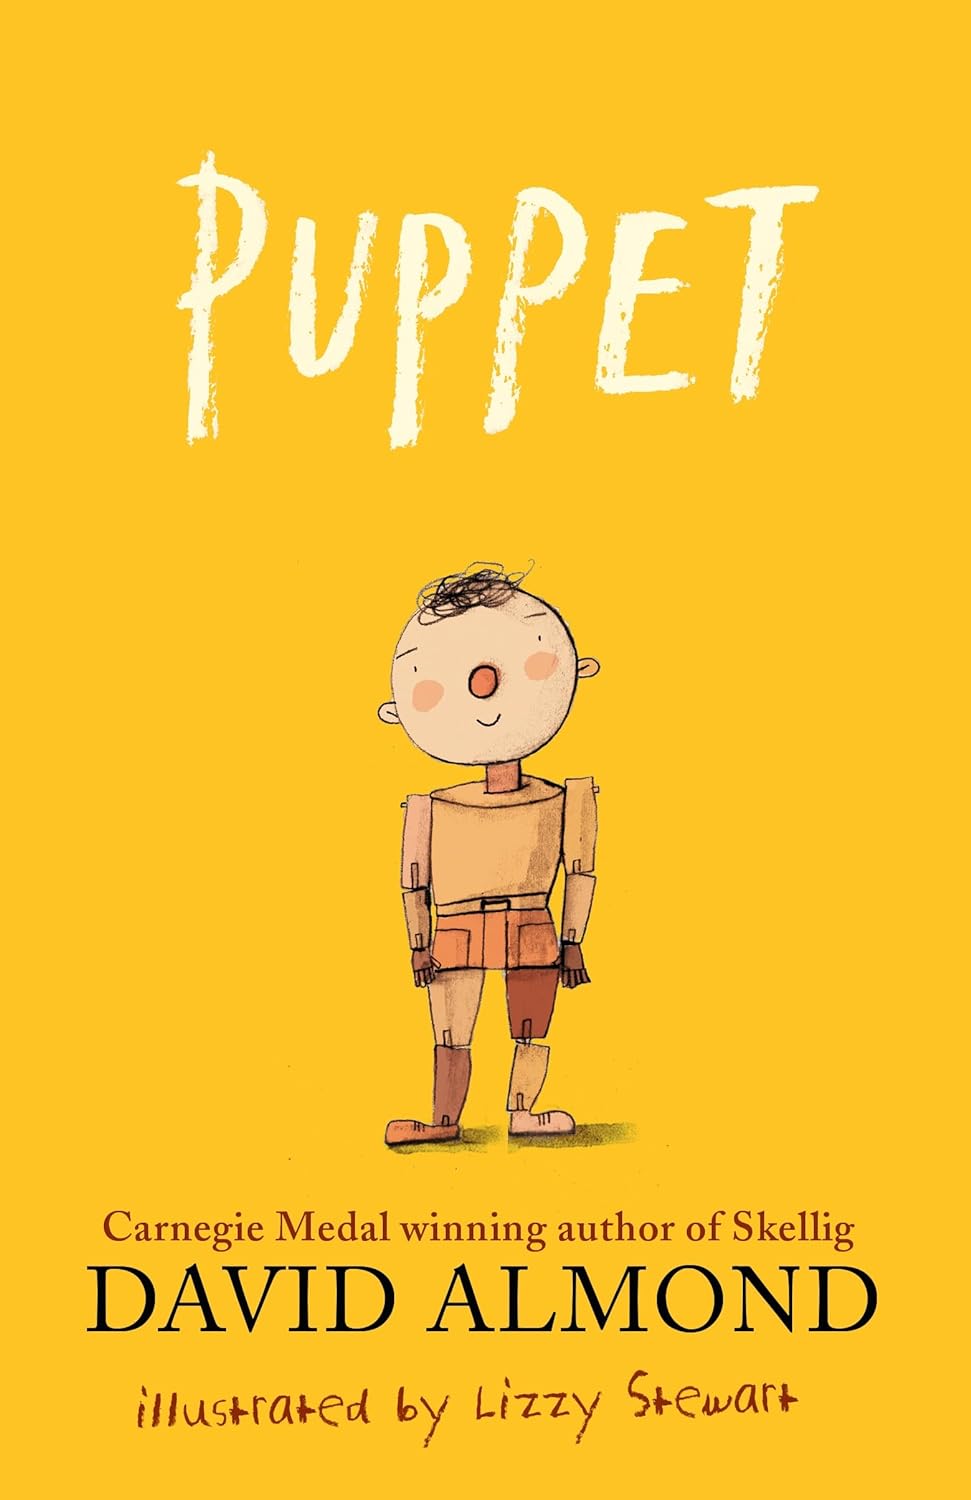 David Almond: Puppet, illustrated by Lizzy Stewart